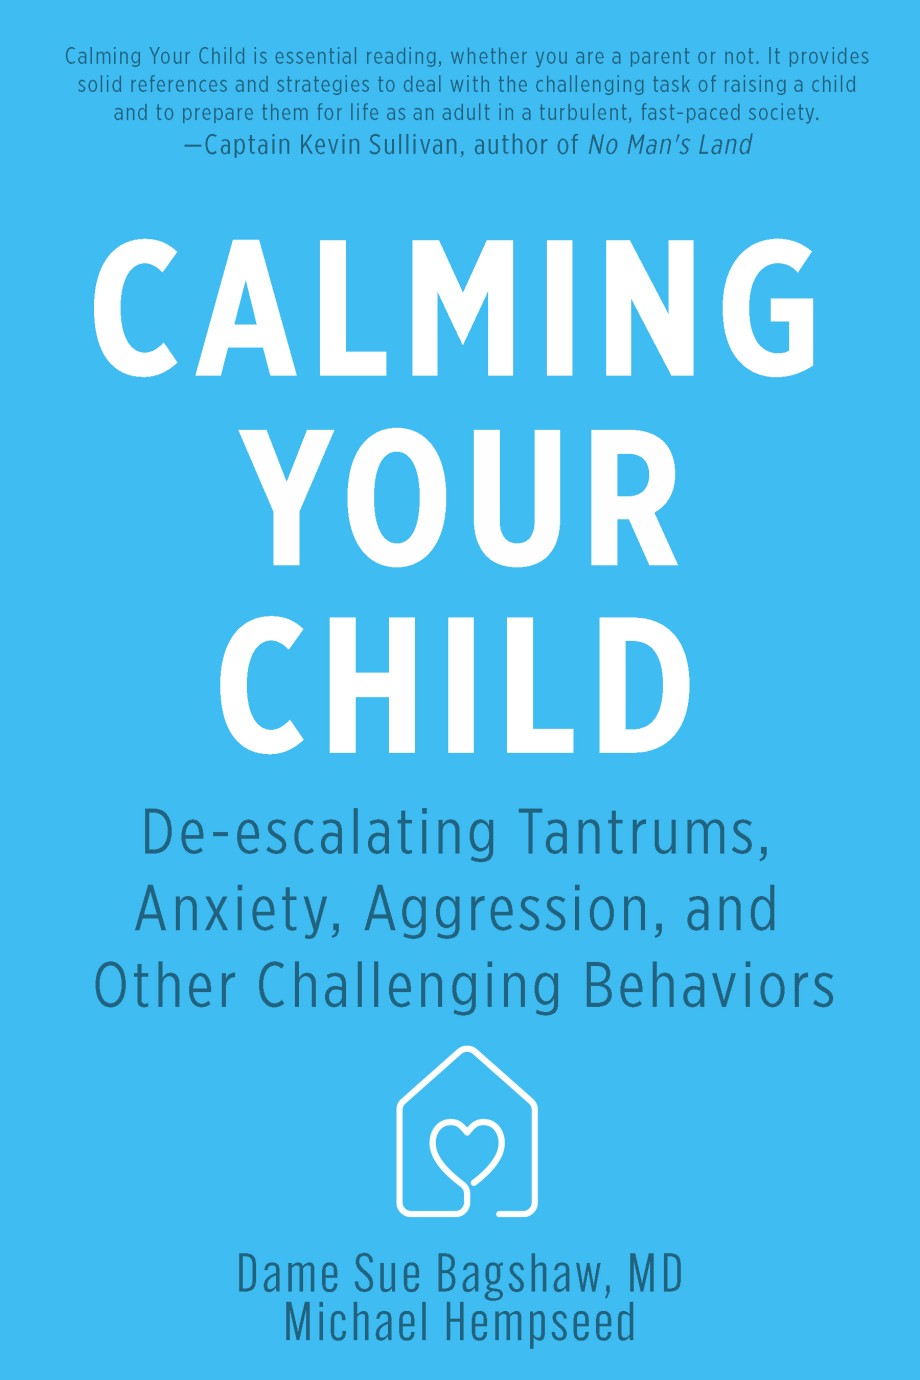 Calming Your Child De-escalating Tantrums, Anxiety, Aggression, and Other Challenging Behaviors